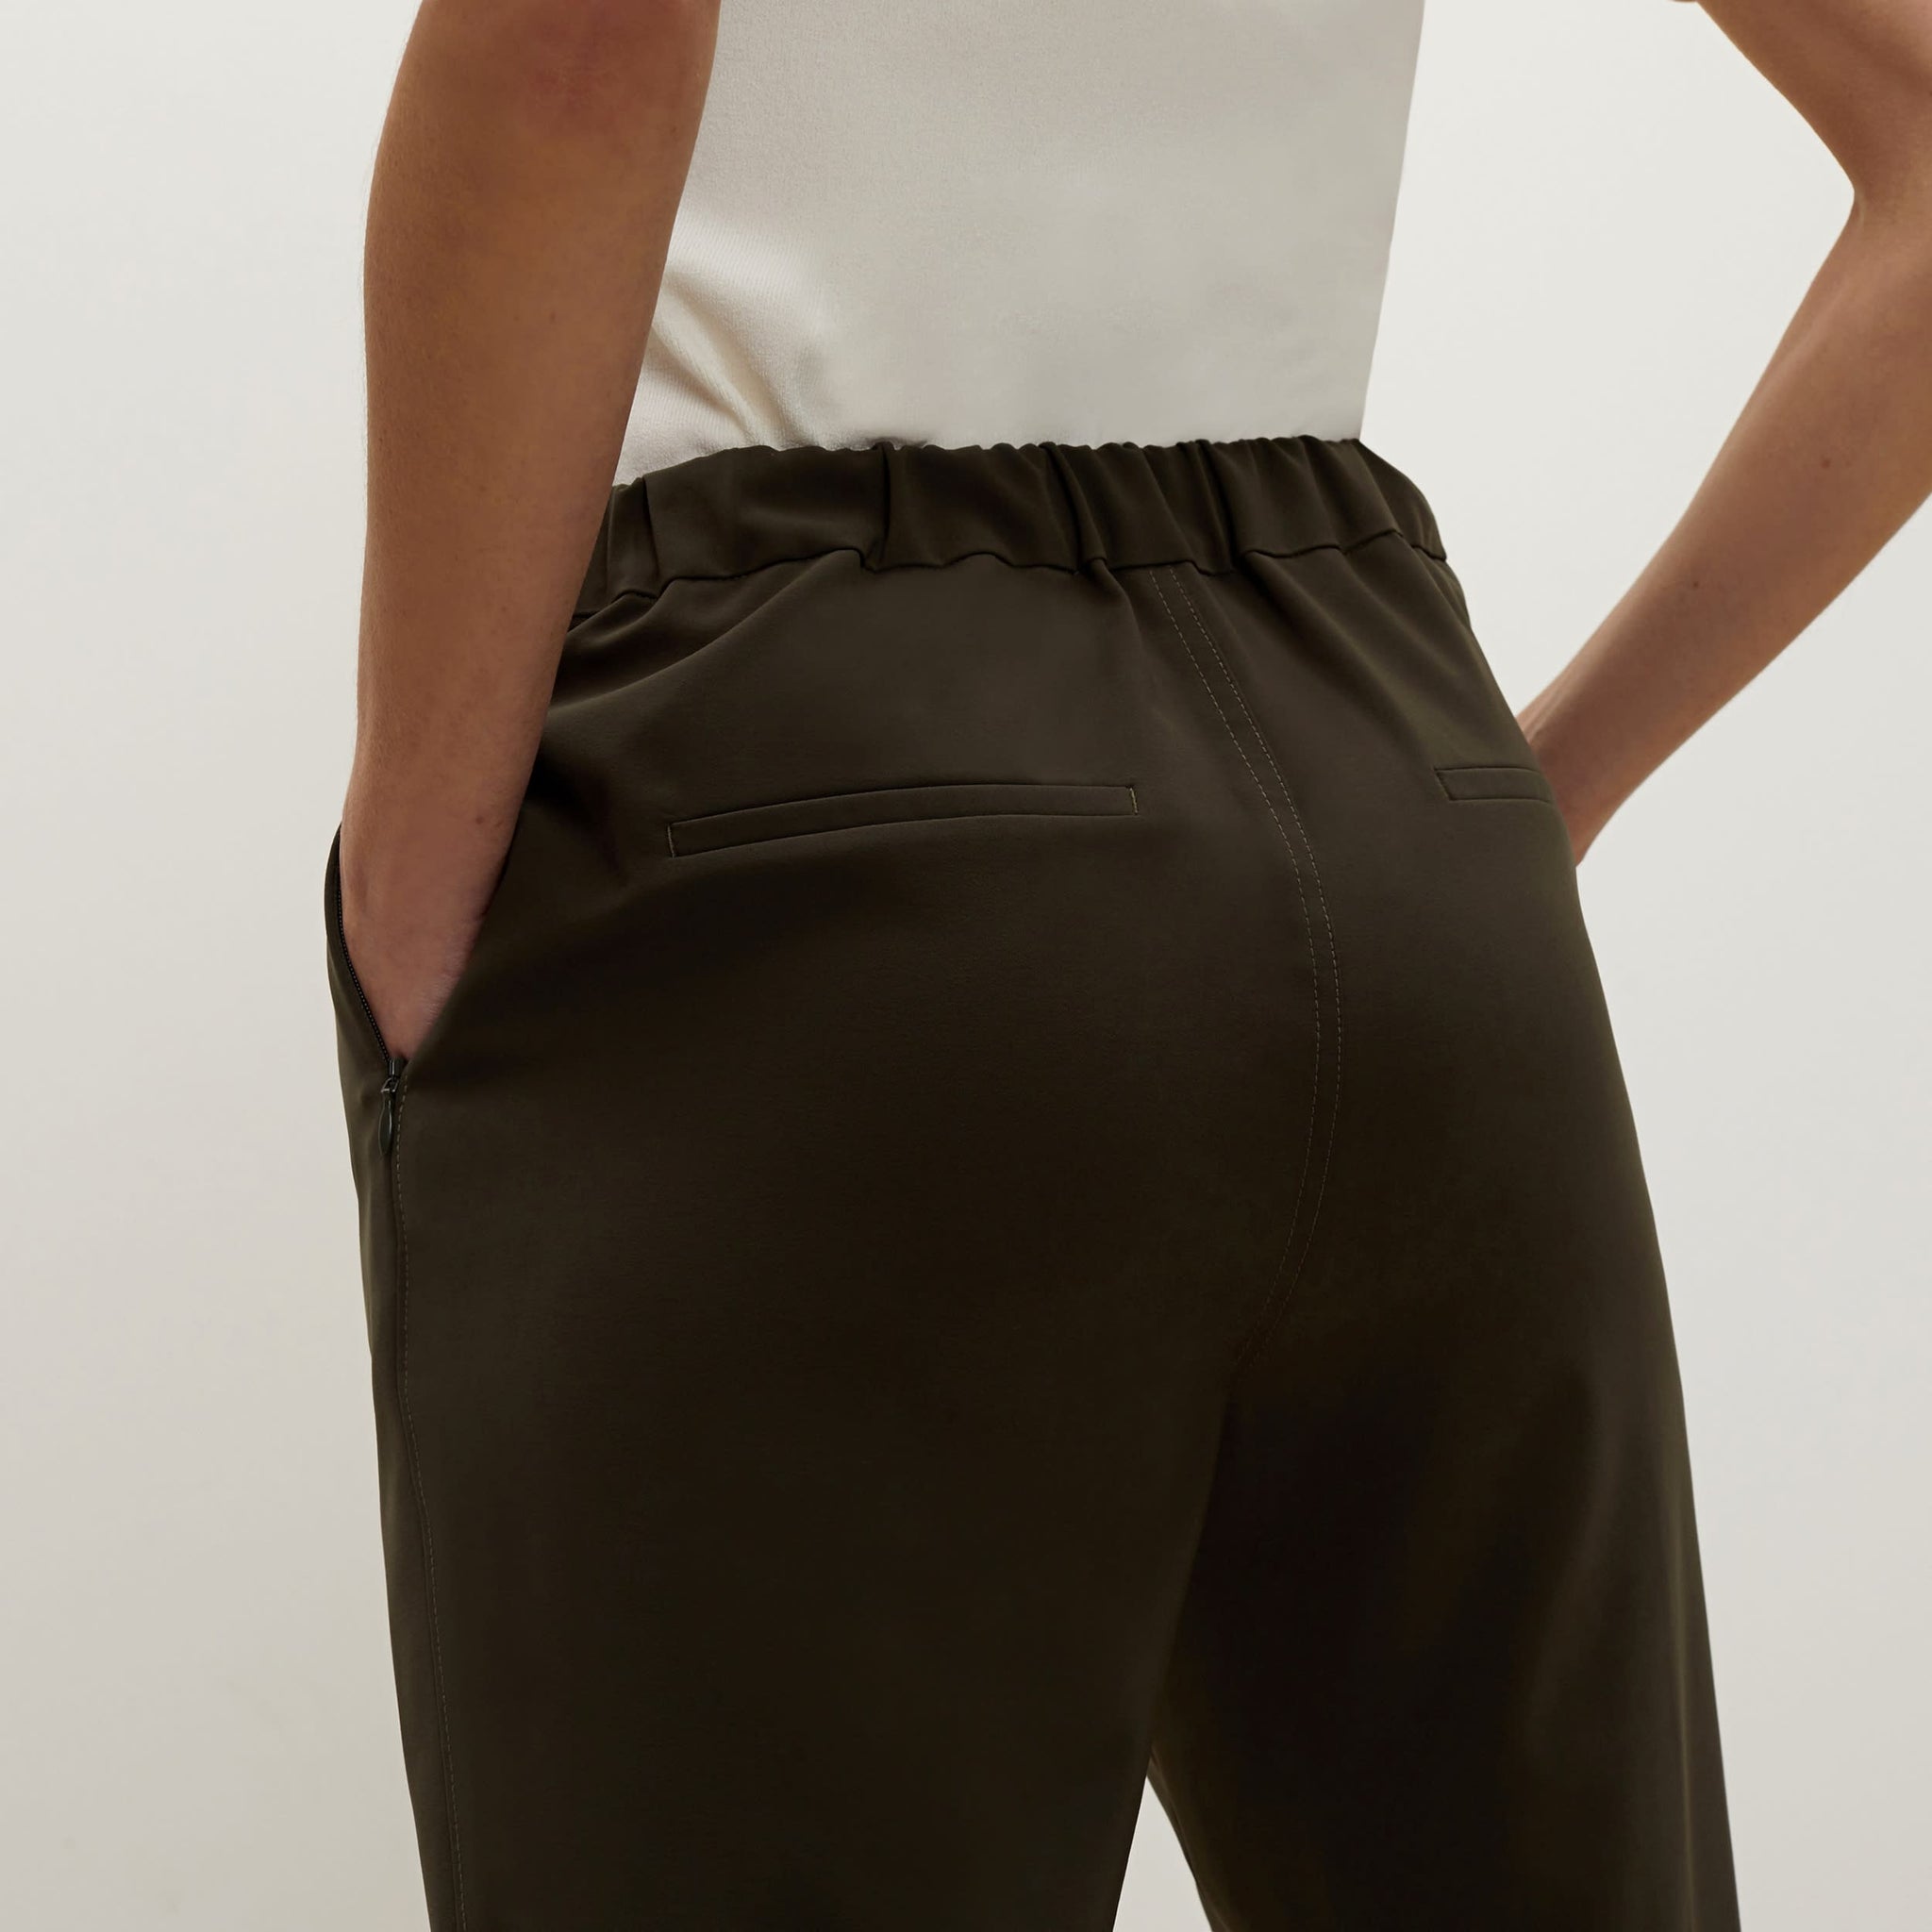 Back image of a woman standing wearing the colby pant in olive